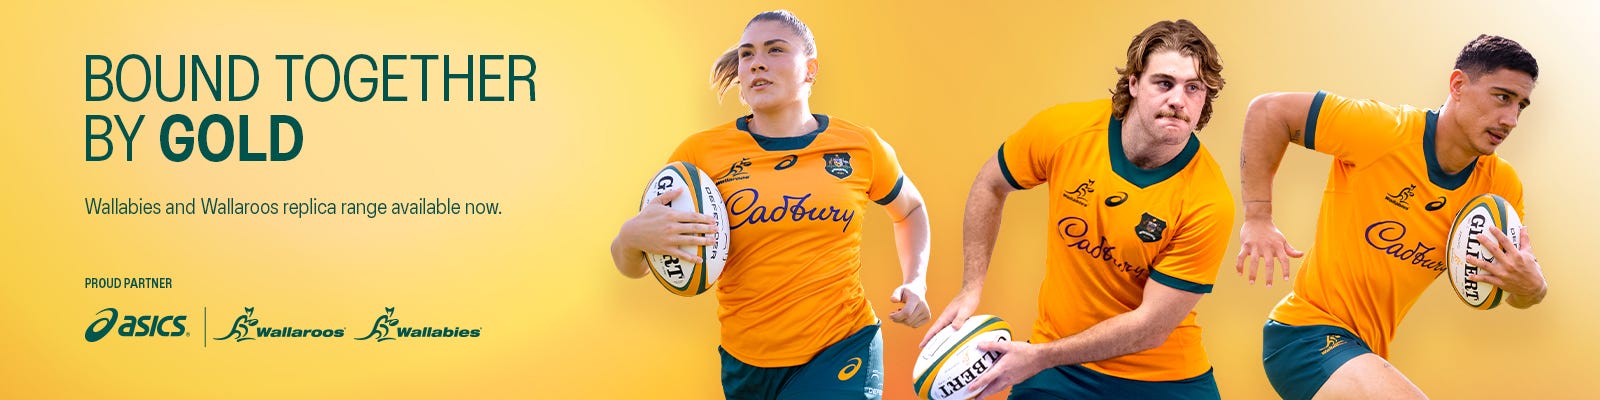 Bound Together By Gold. Wallabies and Wallaroos Replica Range Available Now. 